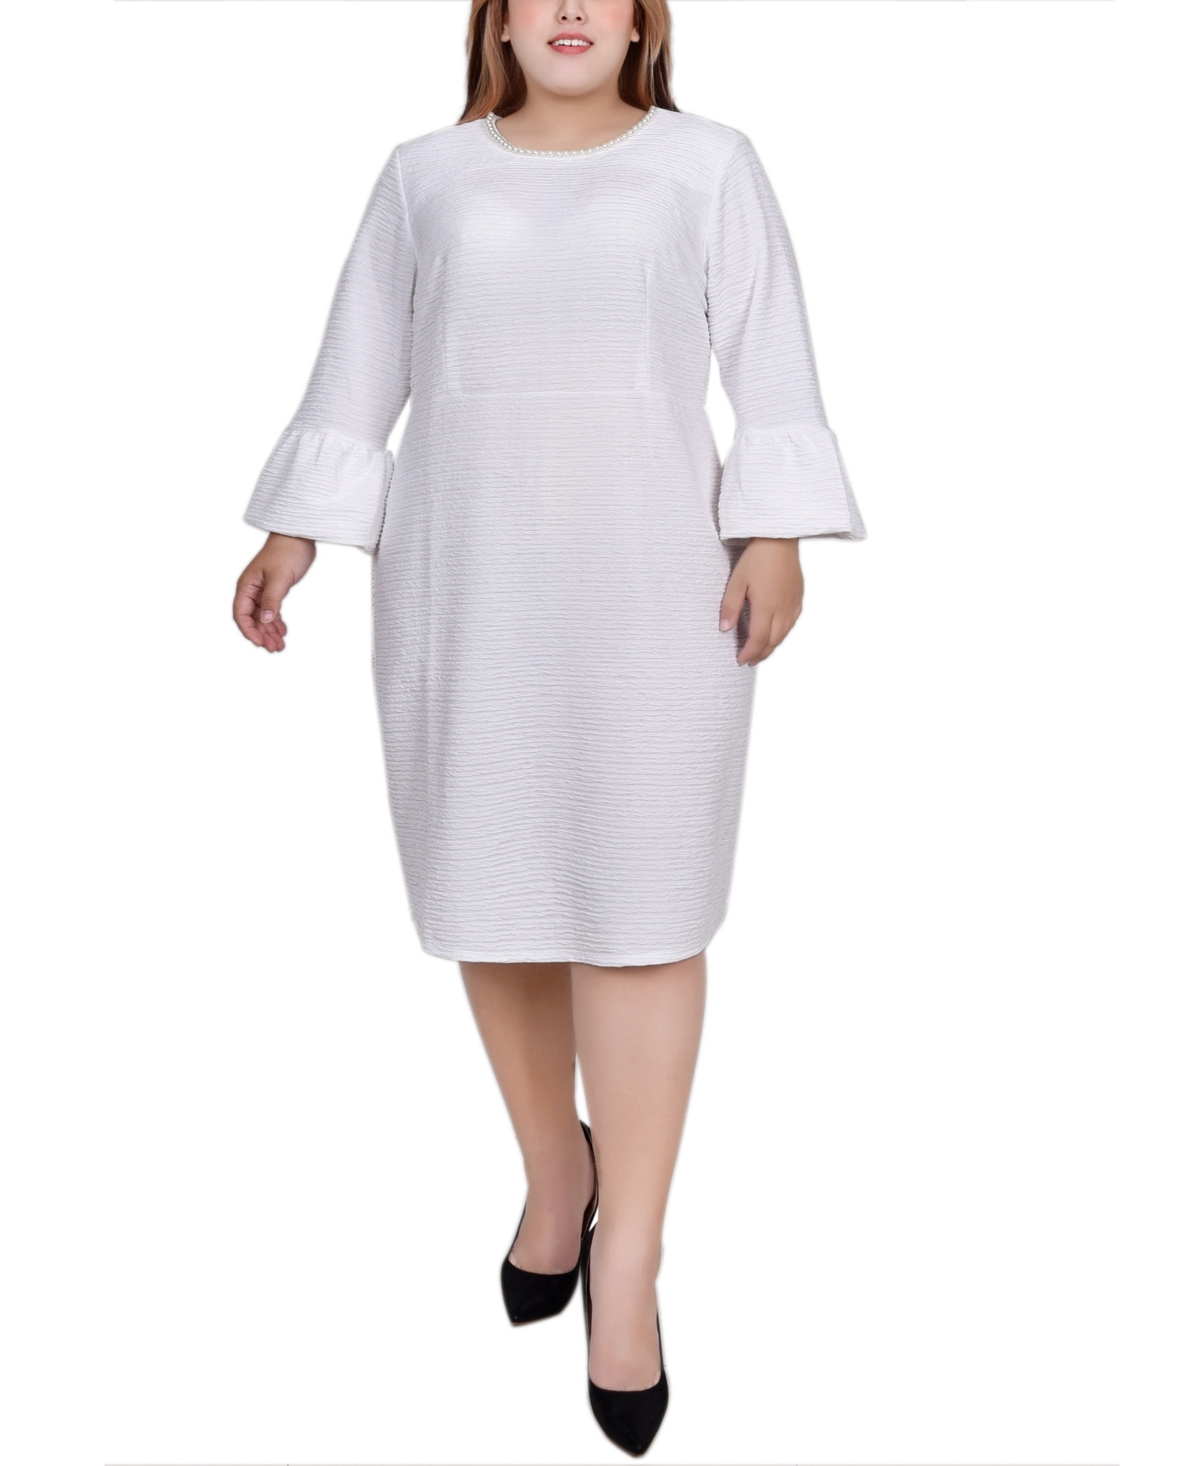 NY COLLECTION PLUS SIZE 3/4 LENGTH IMITATION-PEARL DETAIL DRESS